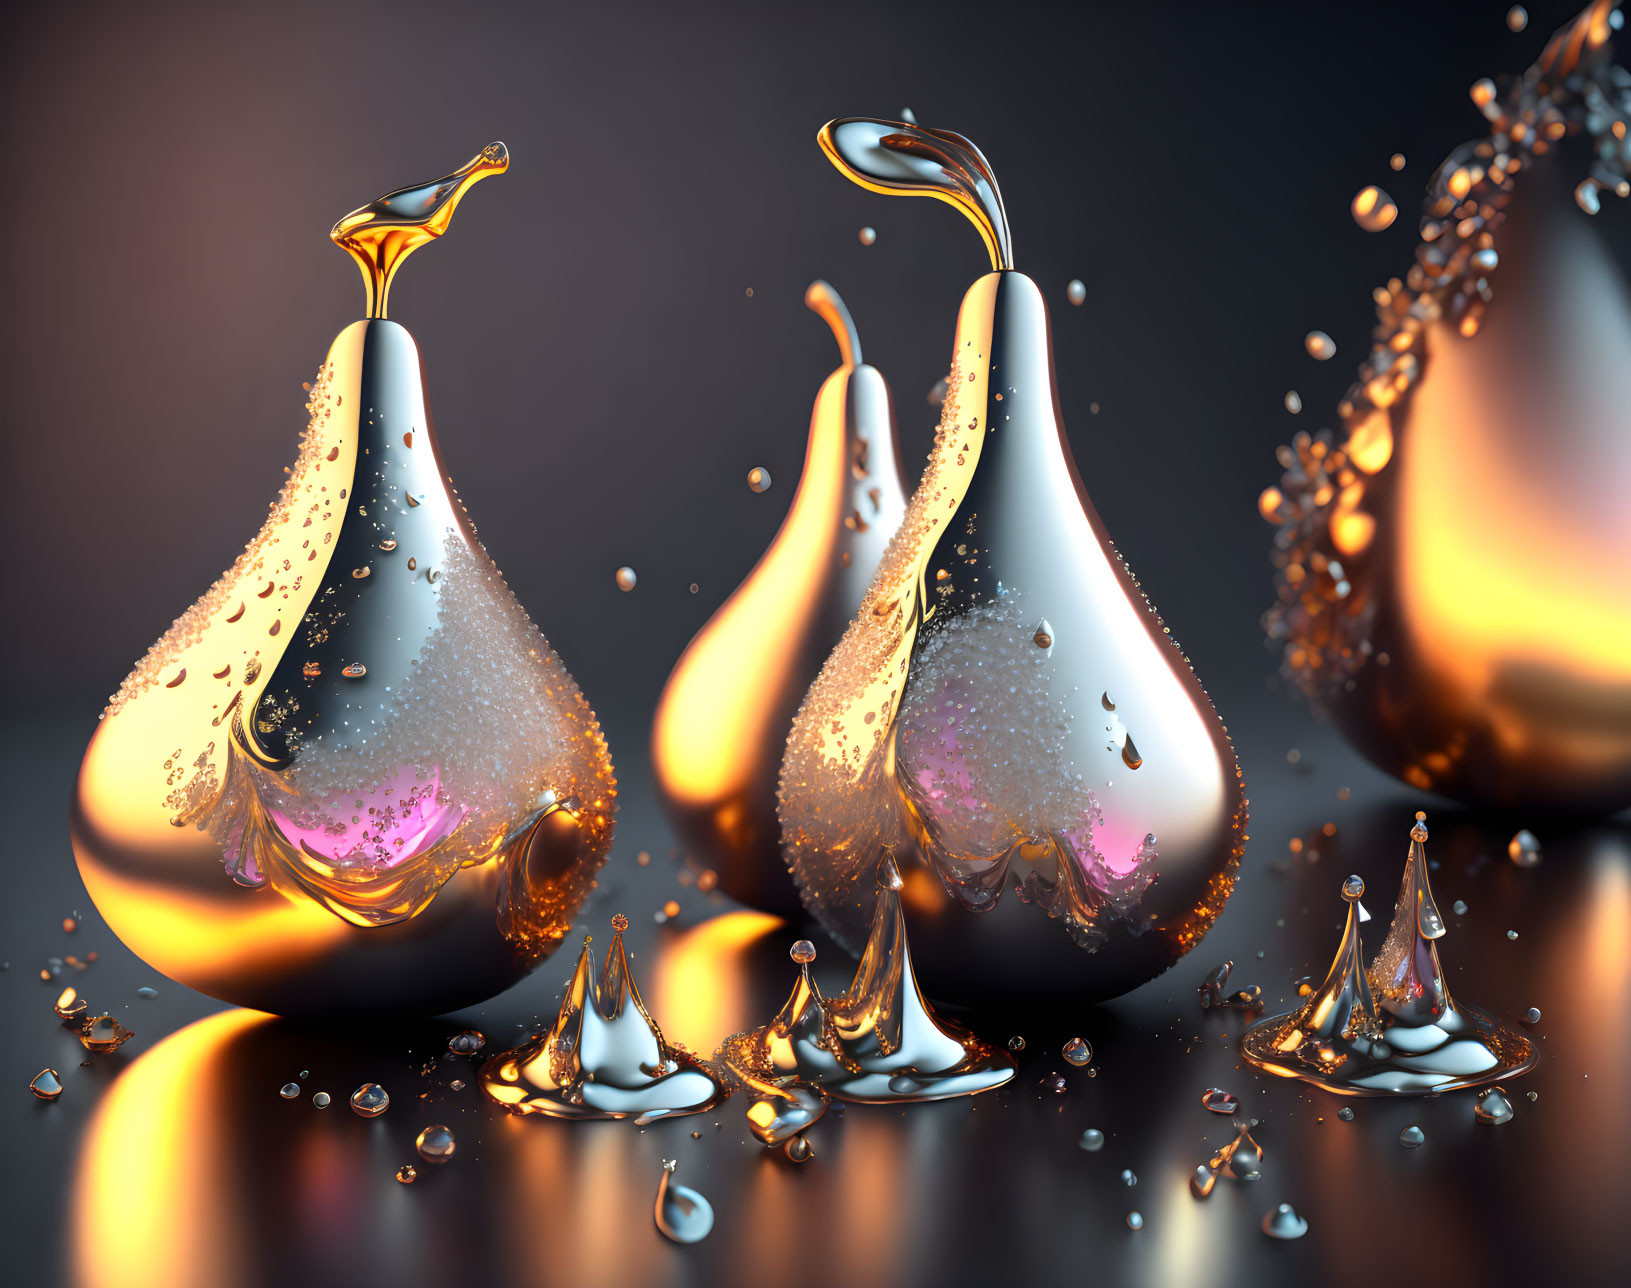 Shiny pear-shaped golden droplets with bubbles on reflective surface